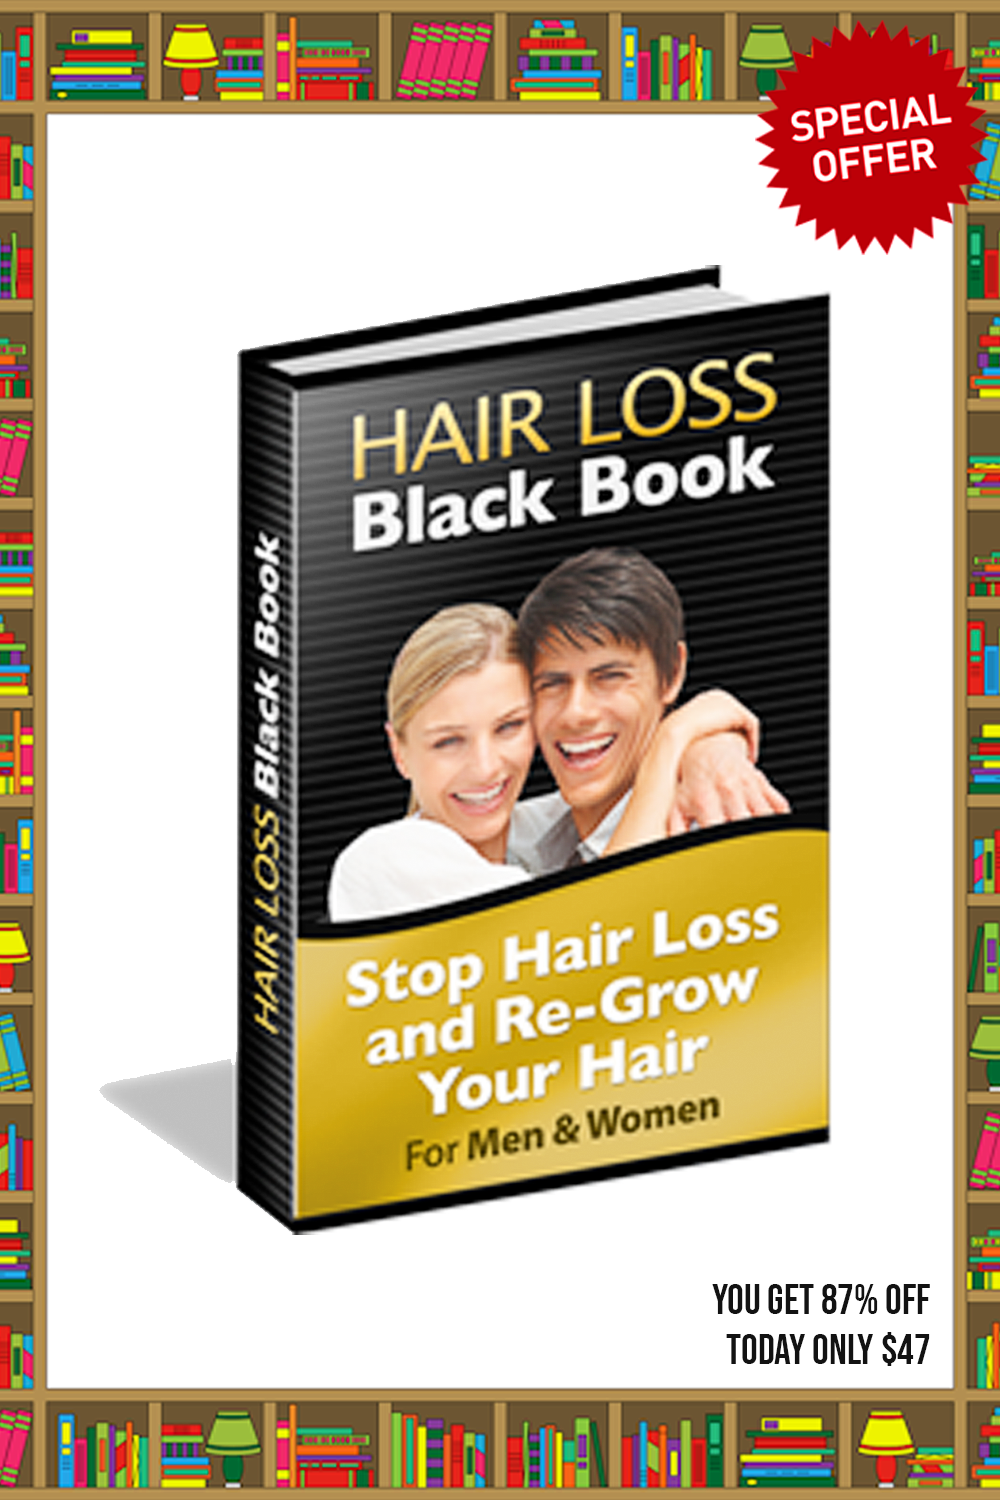 Hot Loss Black Book - Stop Hair Loss and Re-Grow Your Hair